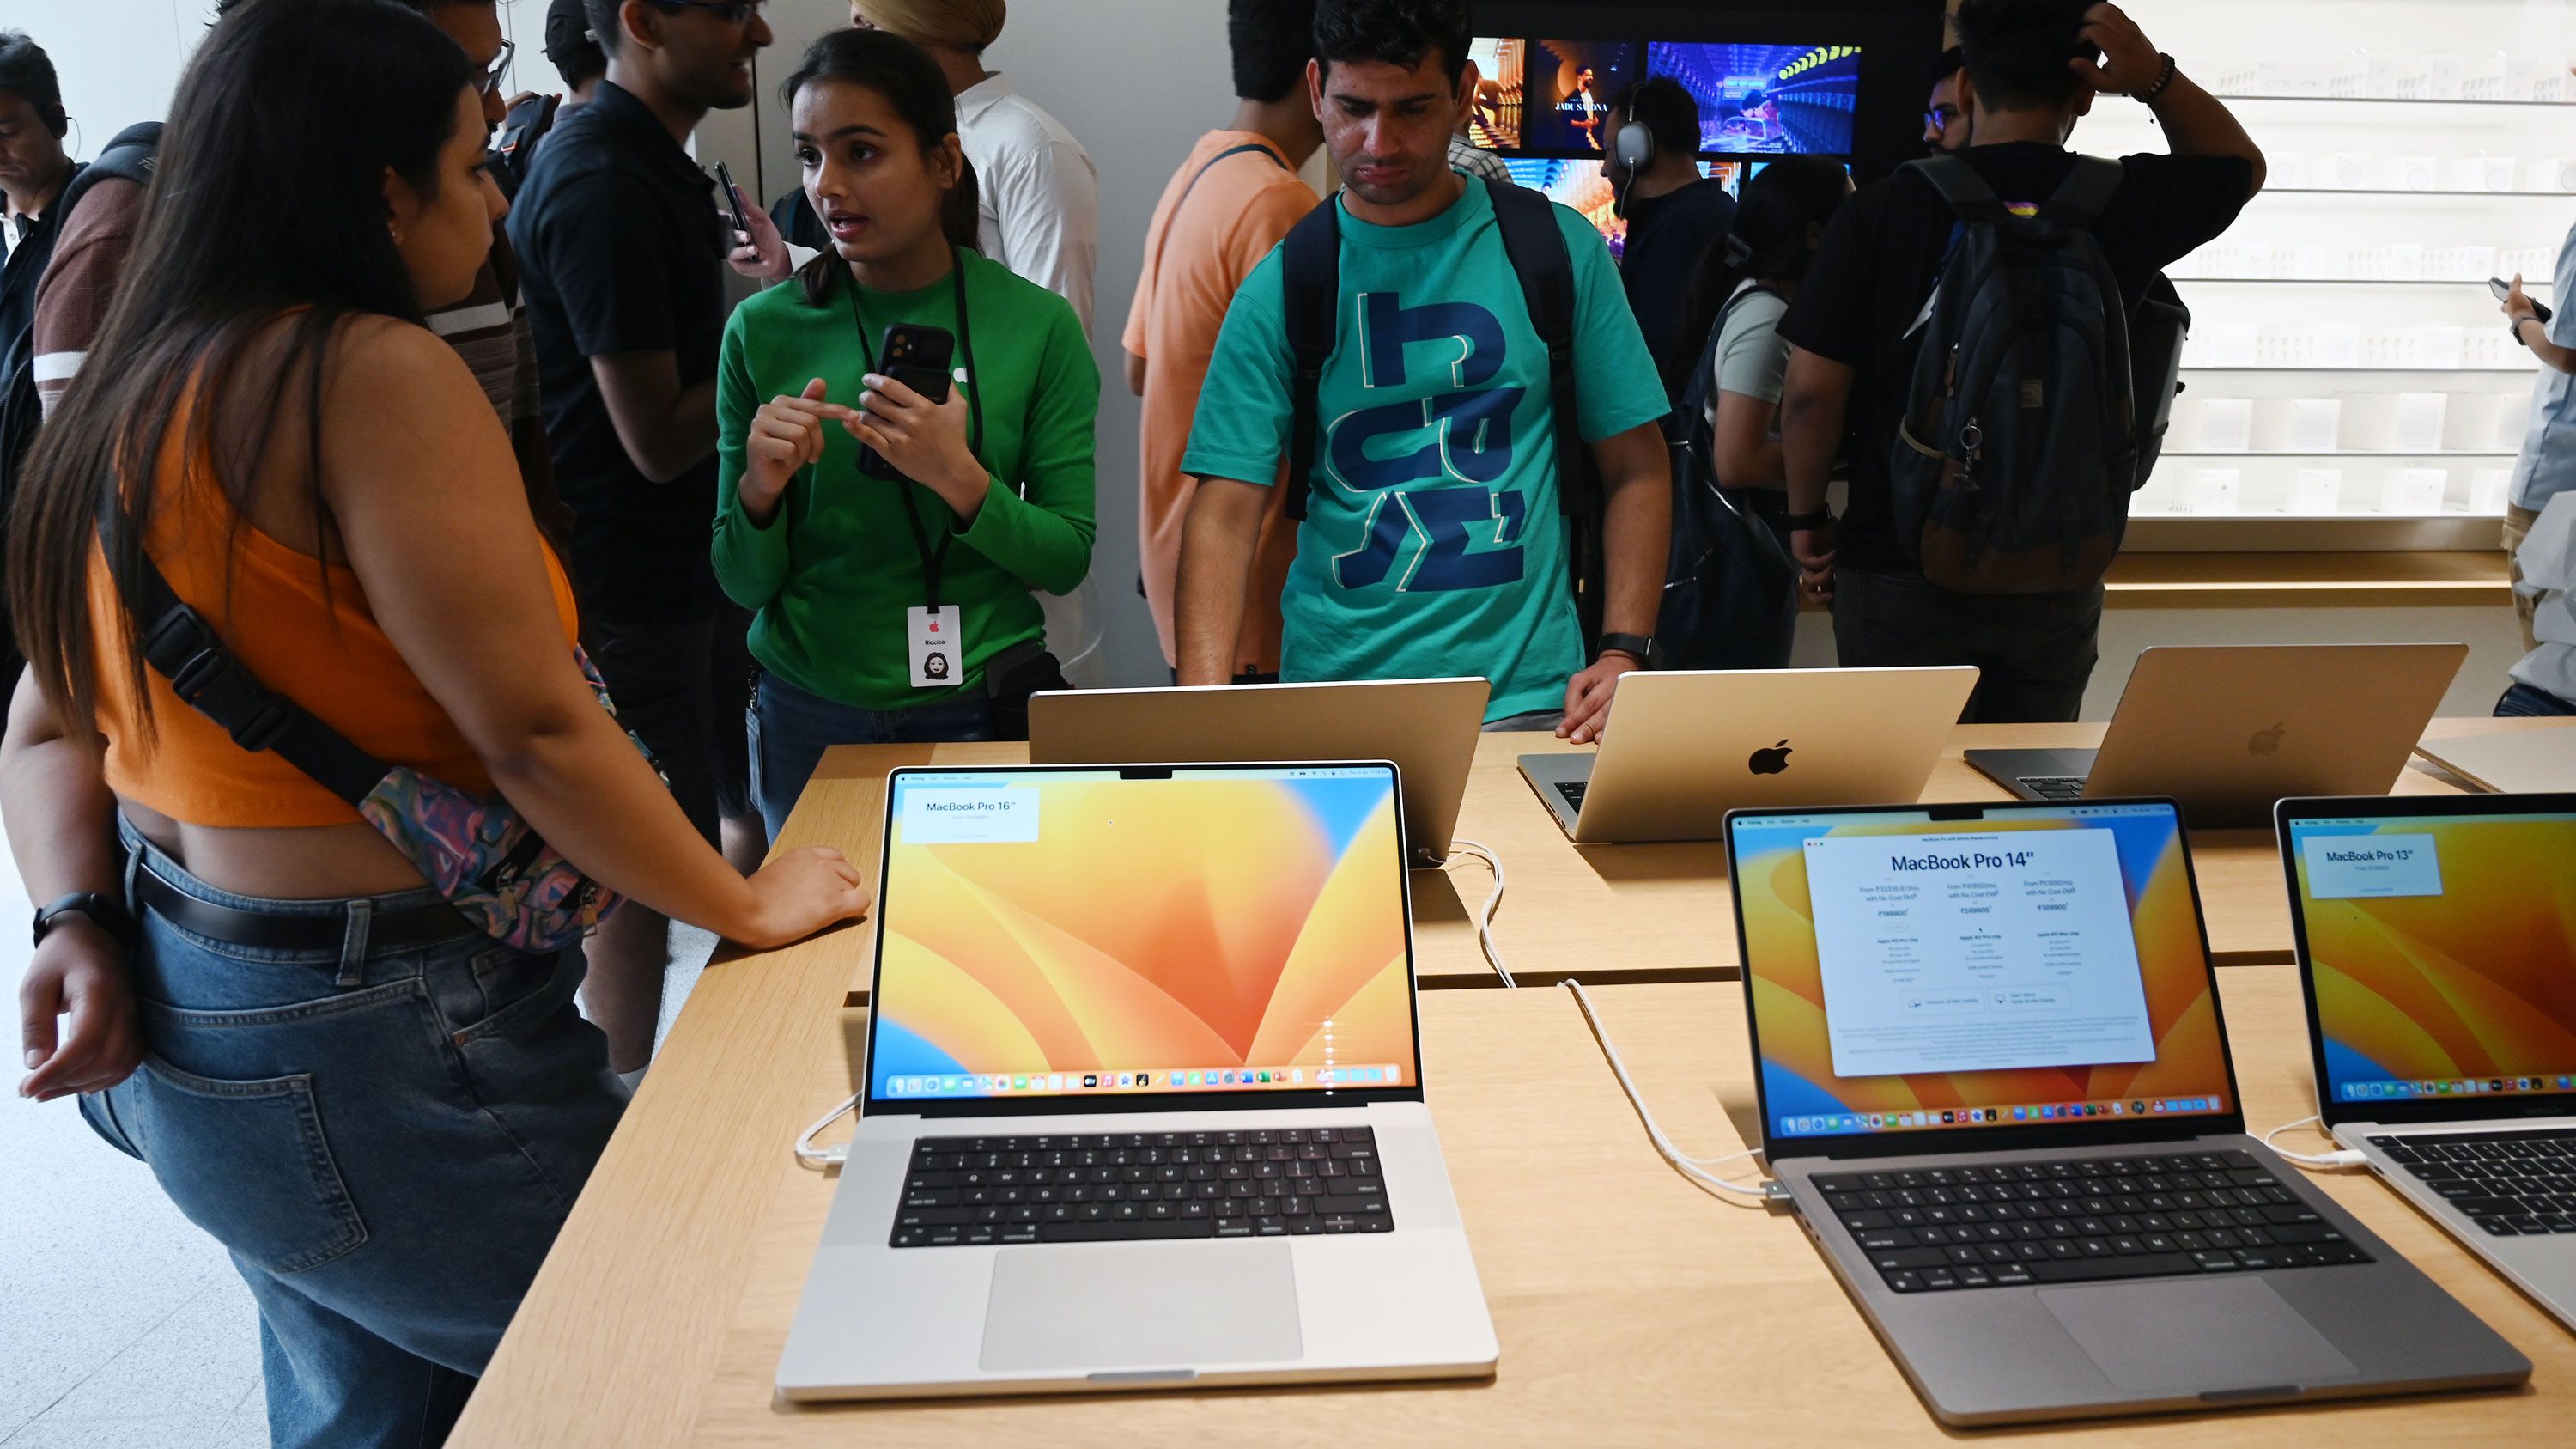 India restricts laptop imports to boost local manufacturing | CNN Business